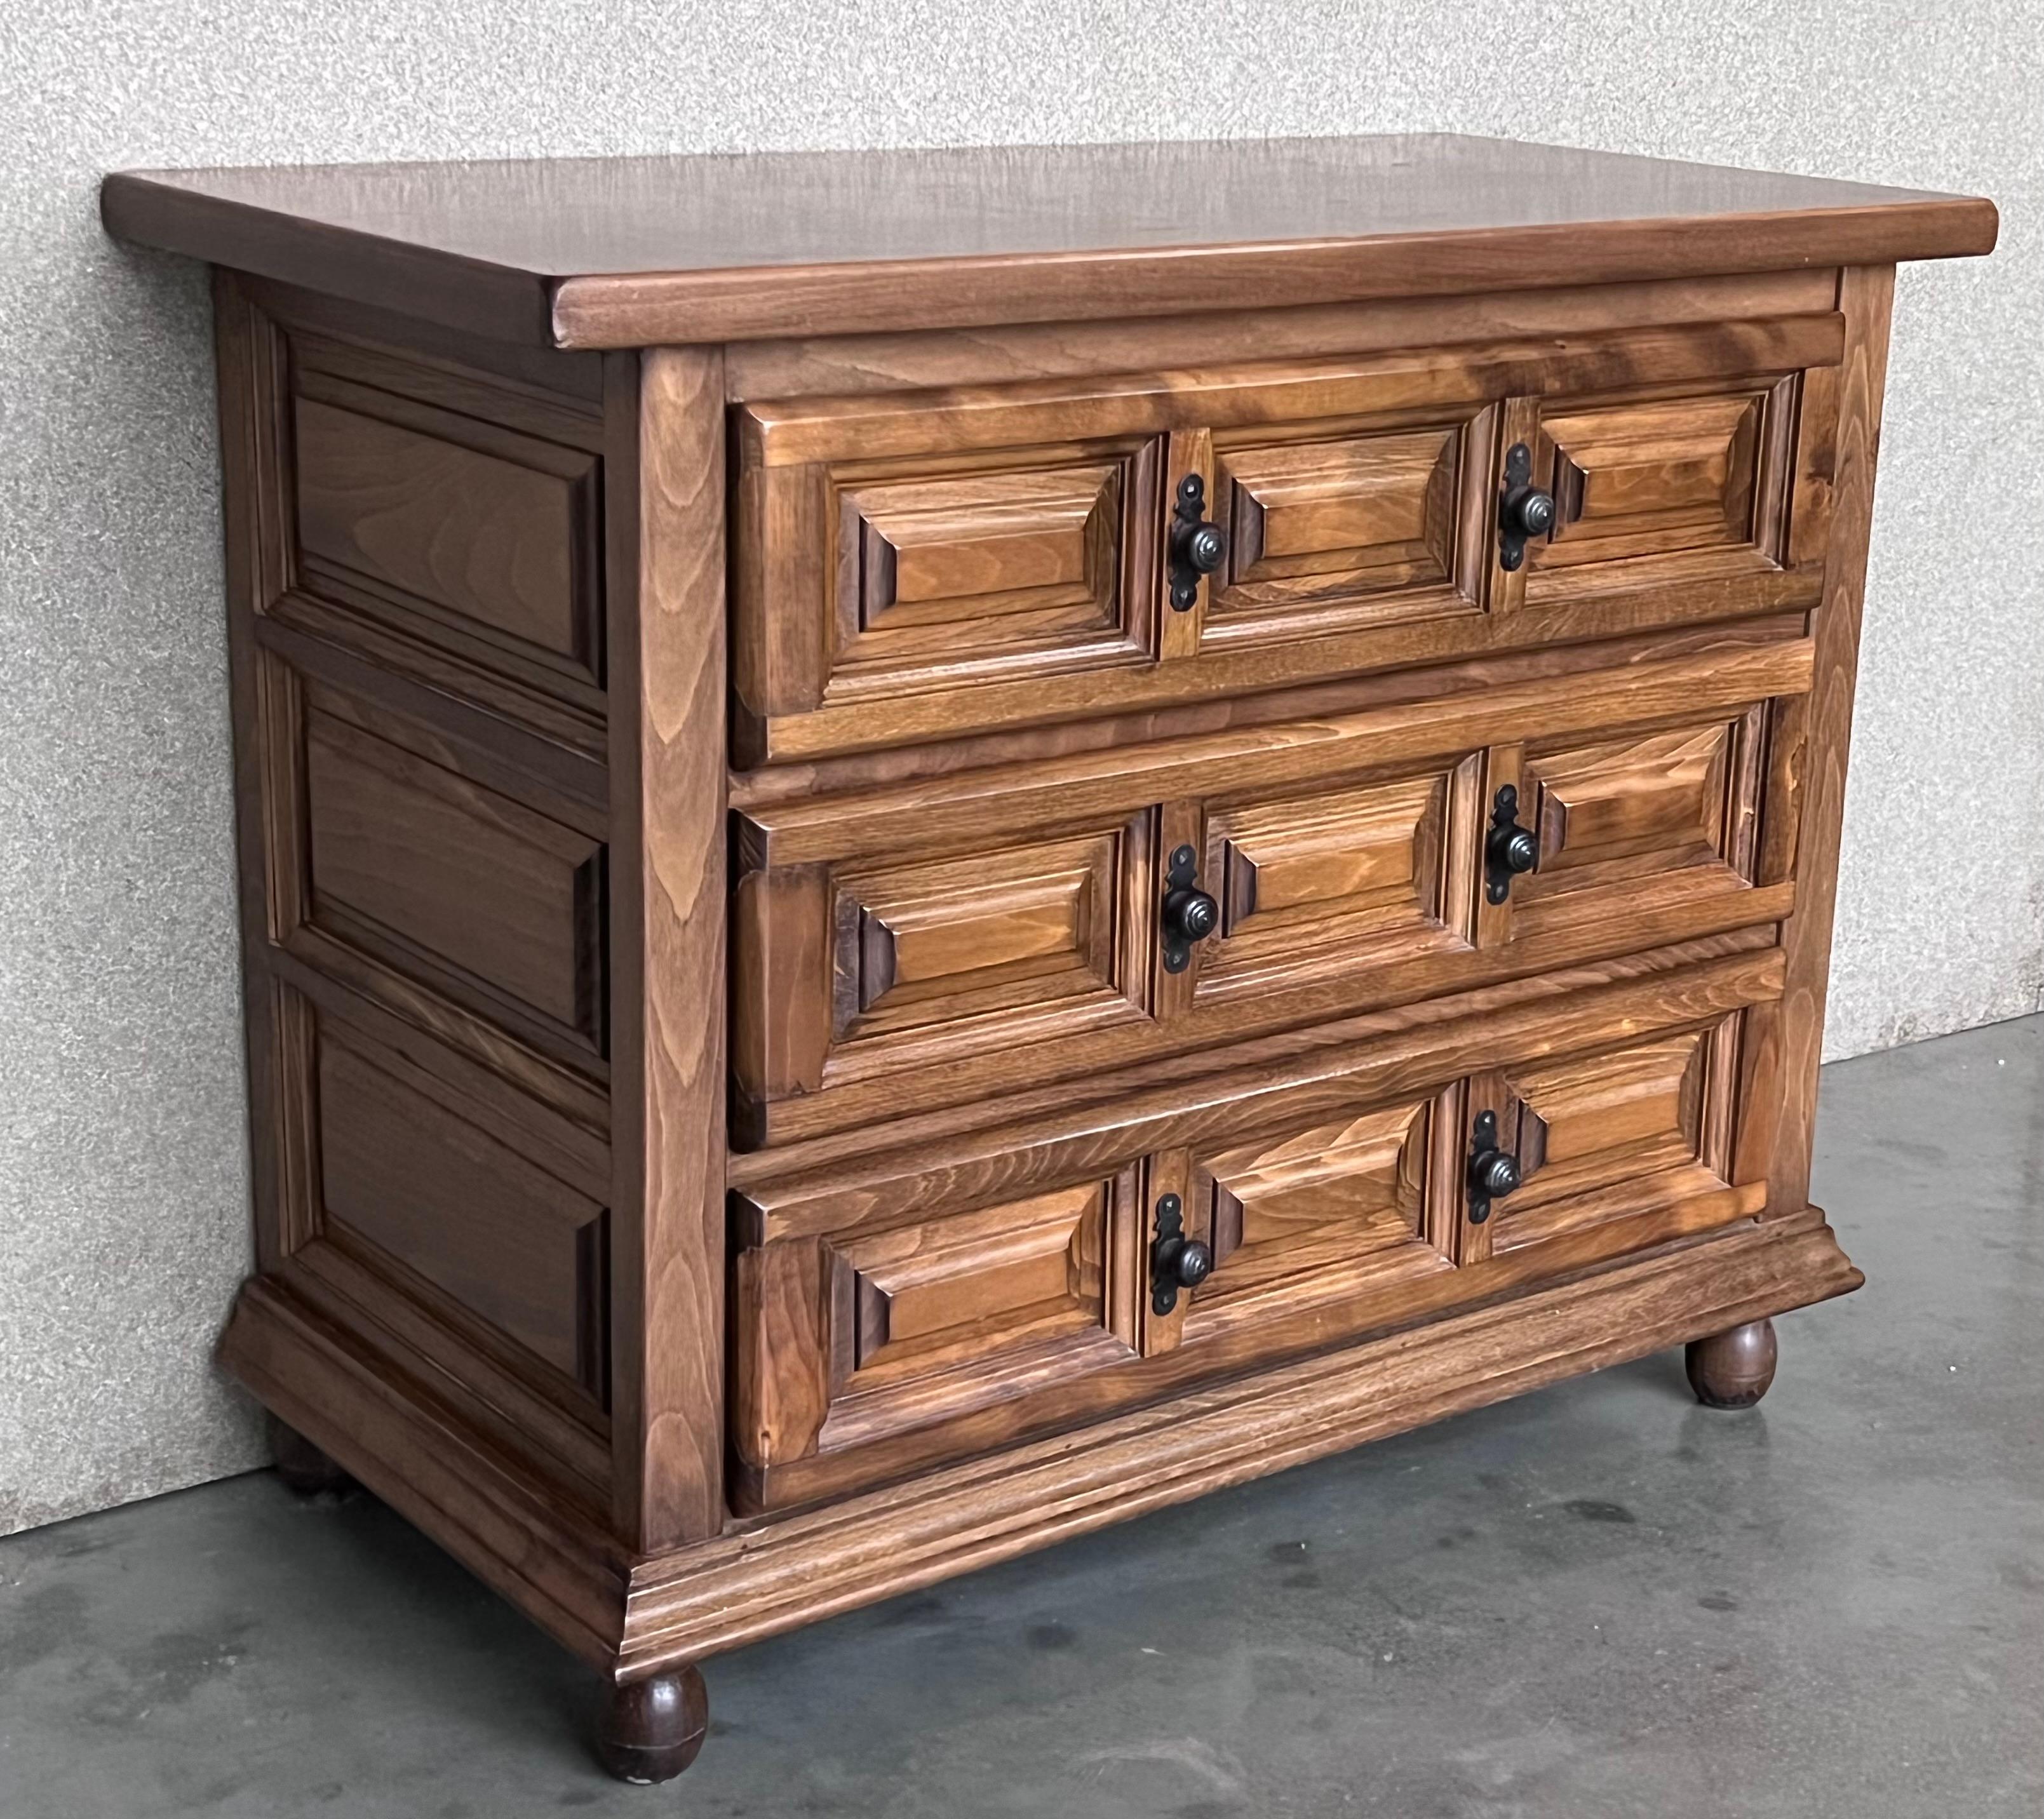 20th Catalan Spanish Baroque Carved Walnut Tuscan Three Drawers Chest of Drawers In Good Condition For Sale In Miami, FL